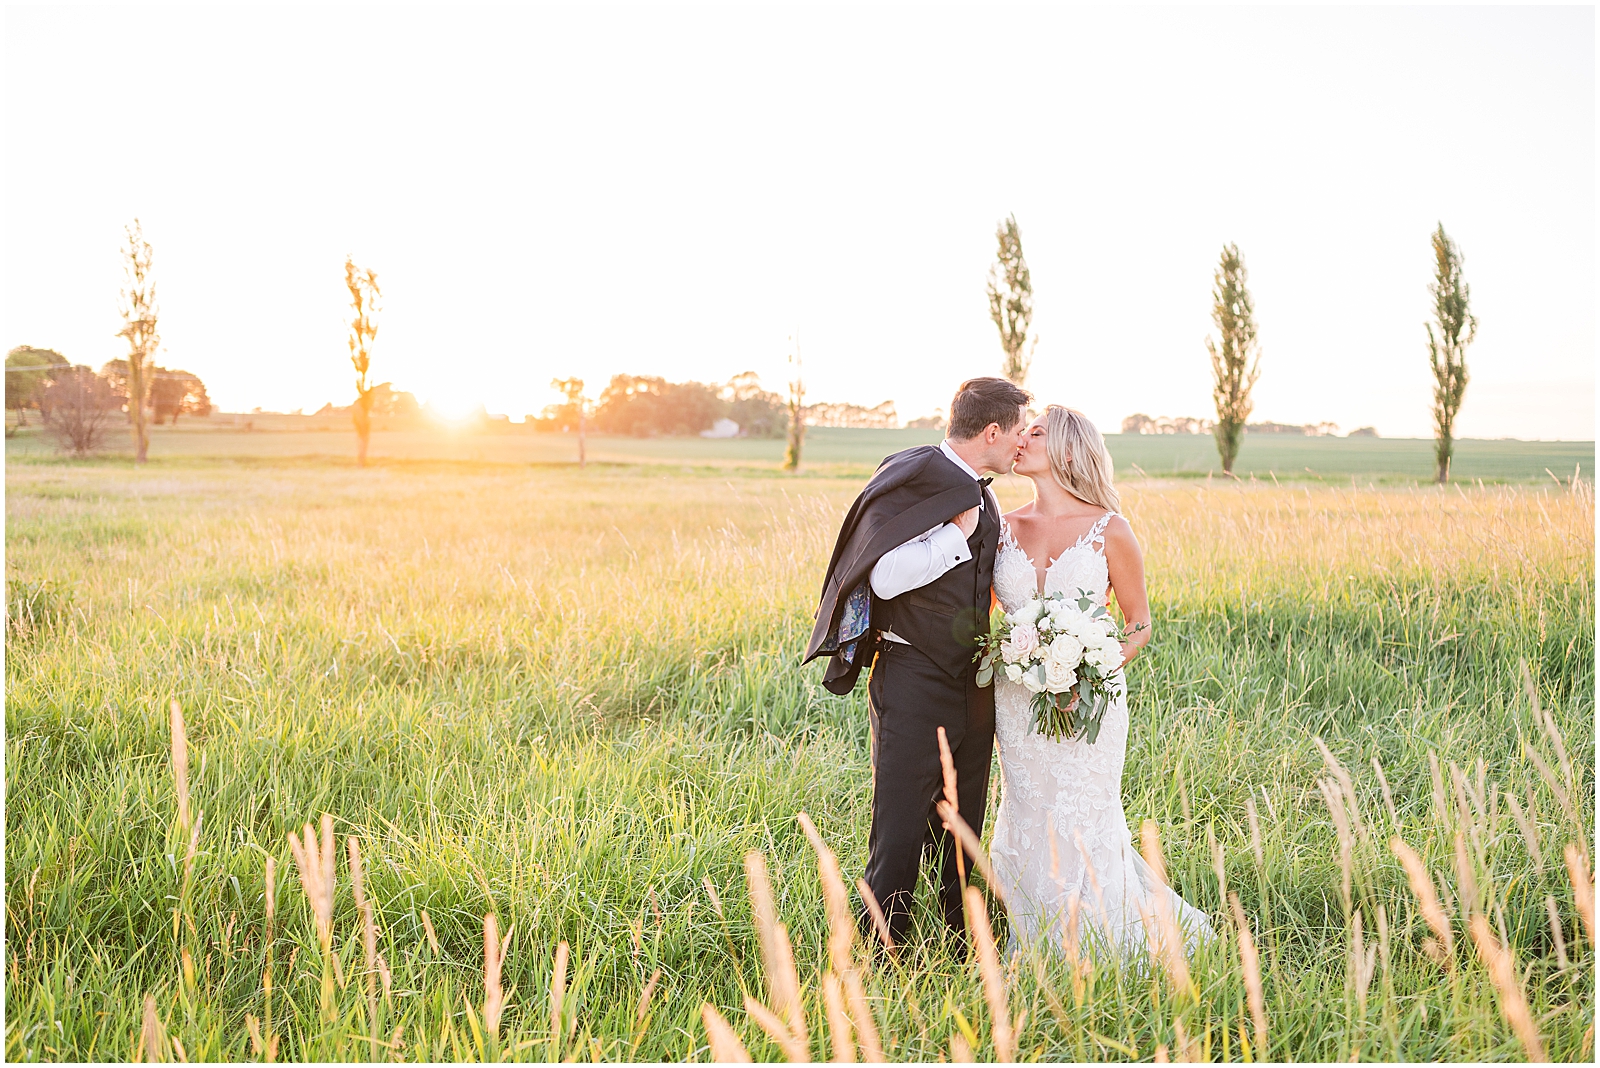 Sunset wedding portraits at Providence Vineyard in Hebron, IL